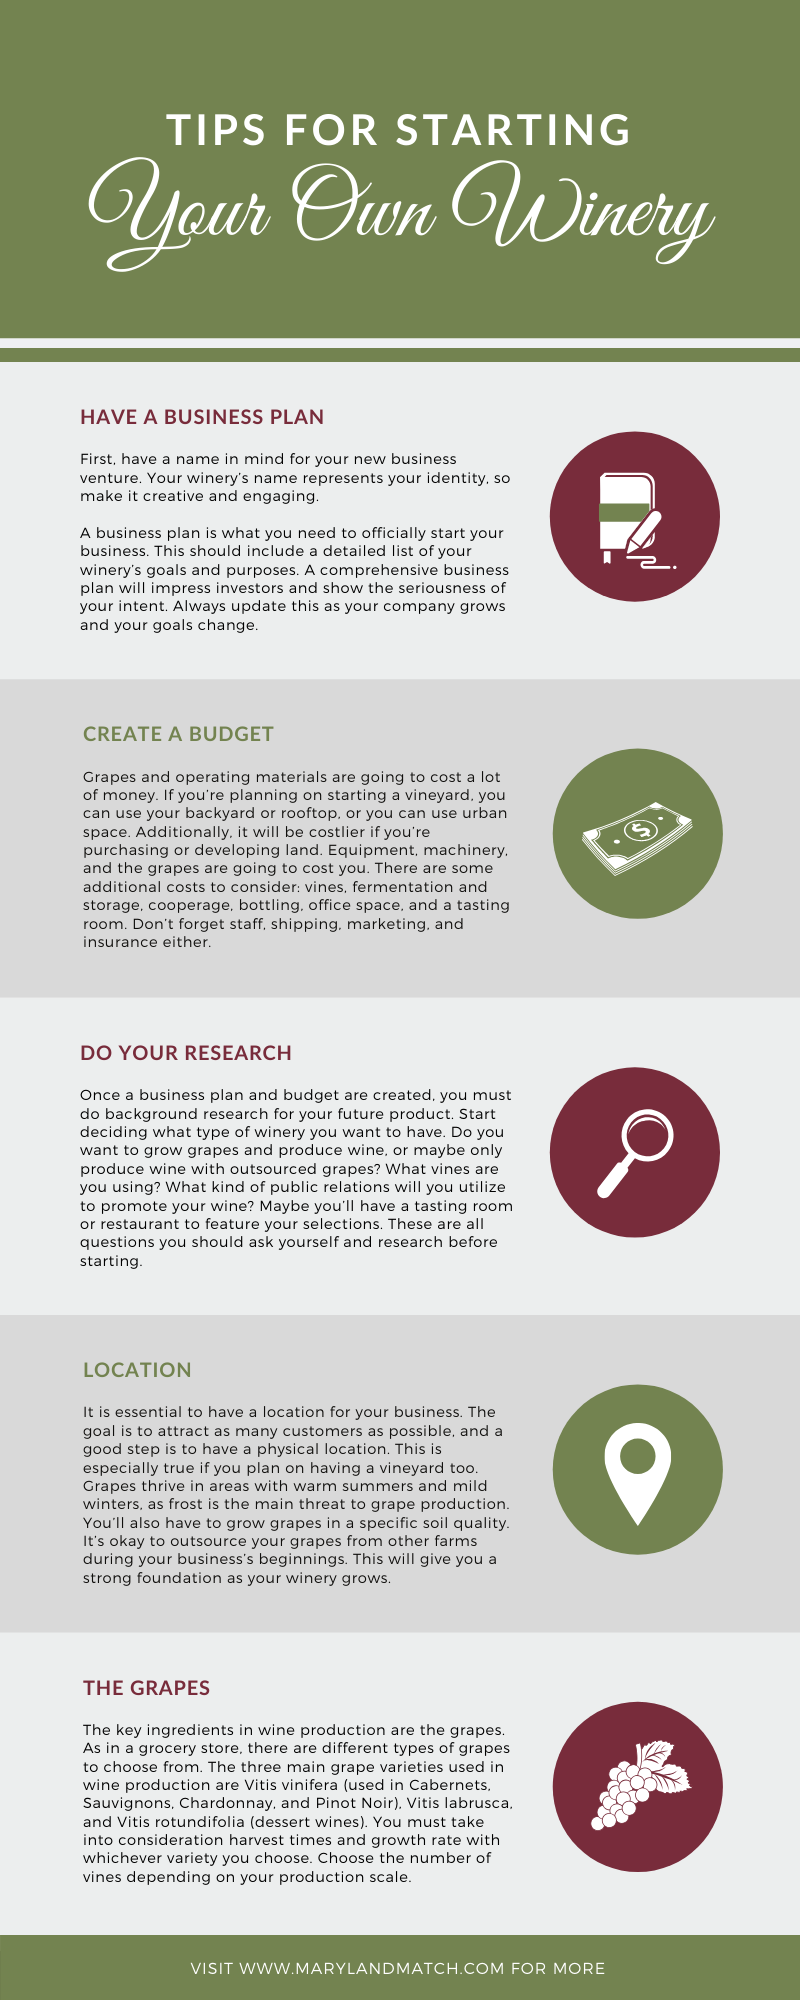 Tips for Starting Your Own Winery infographic